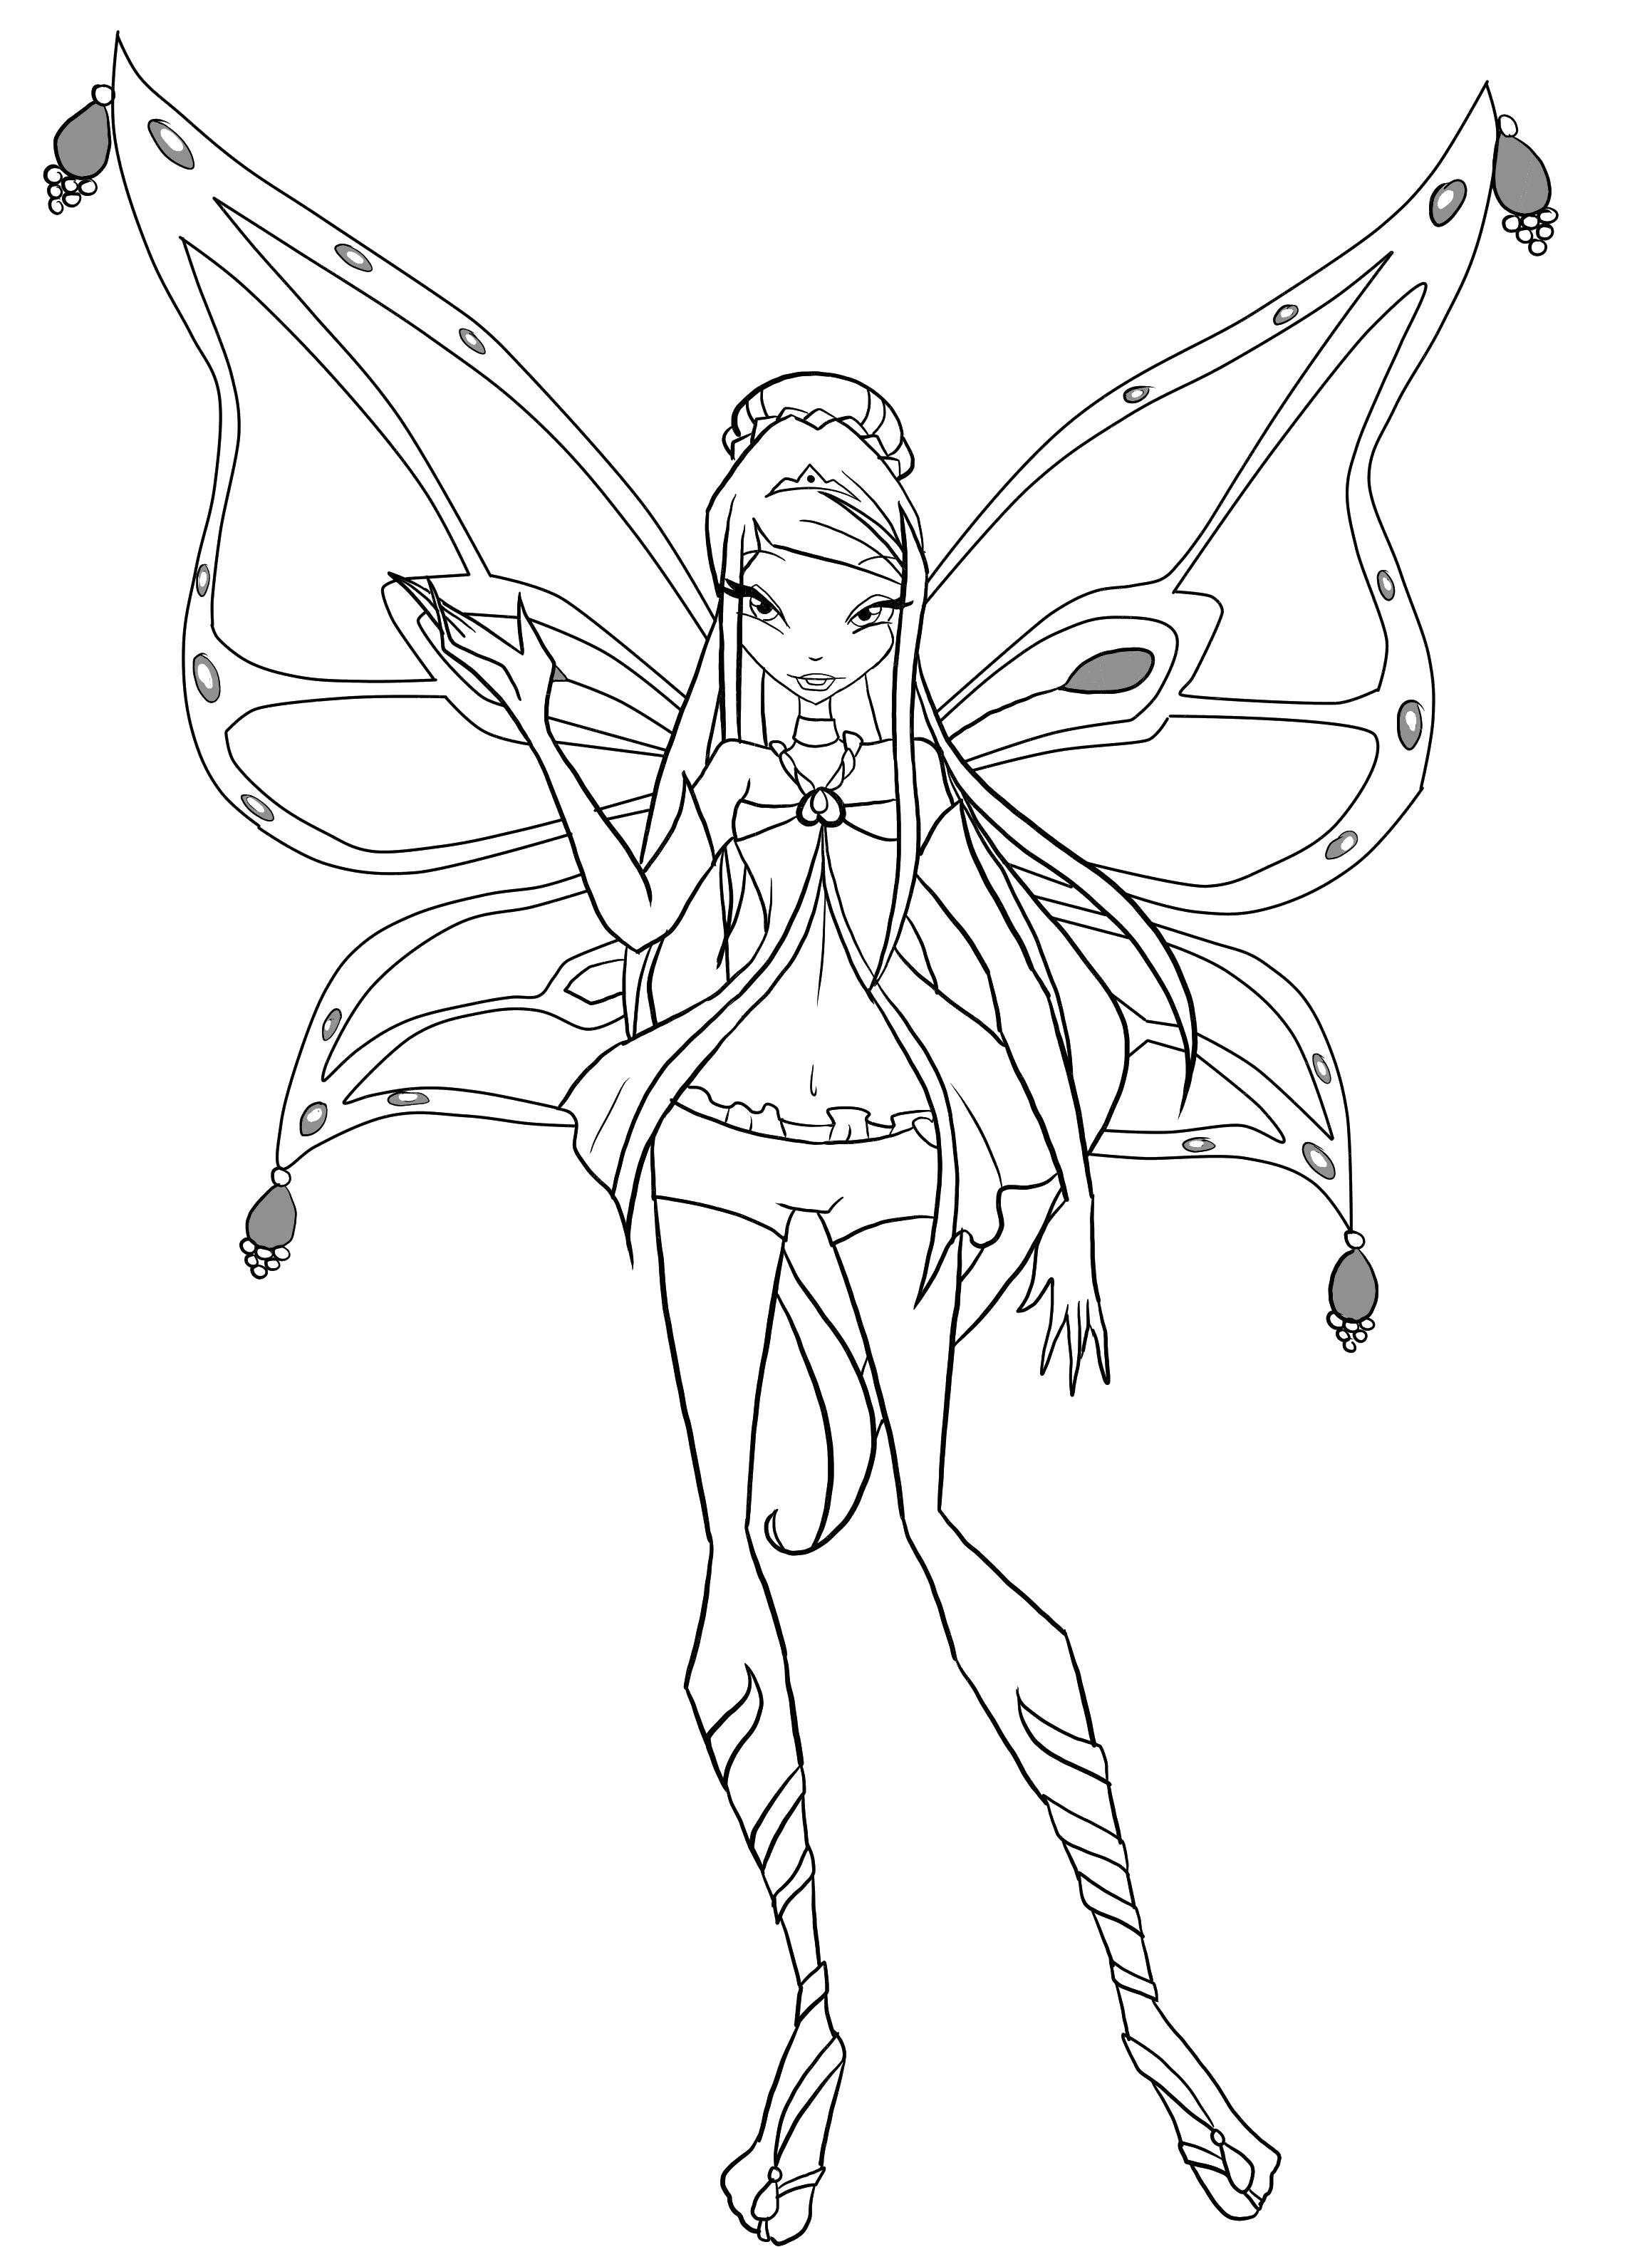 Coloring Fairy of the winx bloom. Category Winx club. Tags:  Character cartoon, Winx.